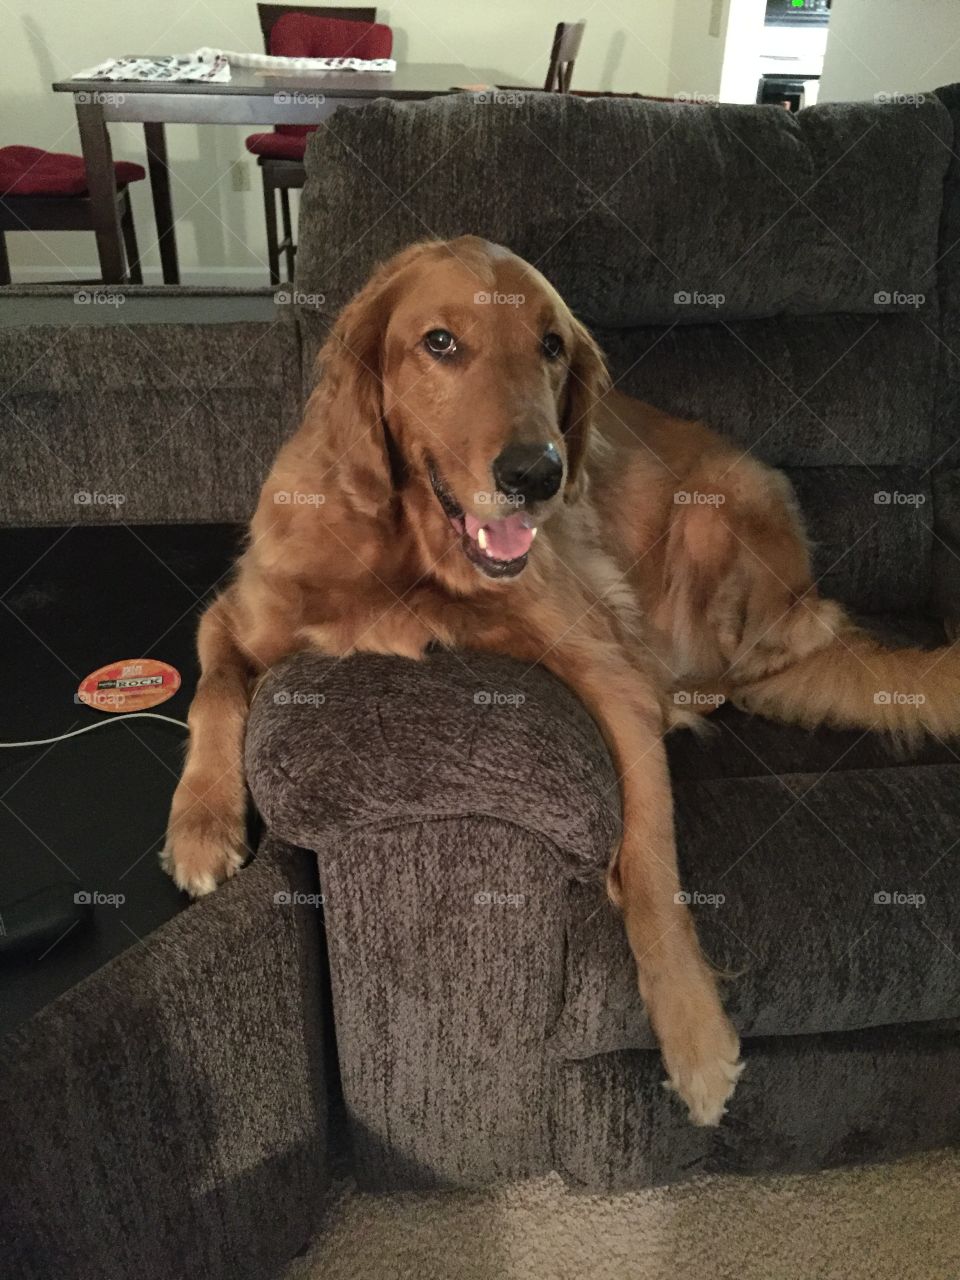 "I don't always sit on the couch, but when I do, I sit with style."